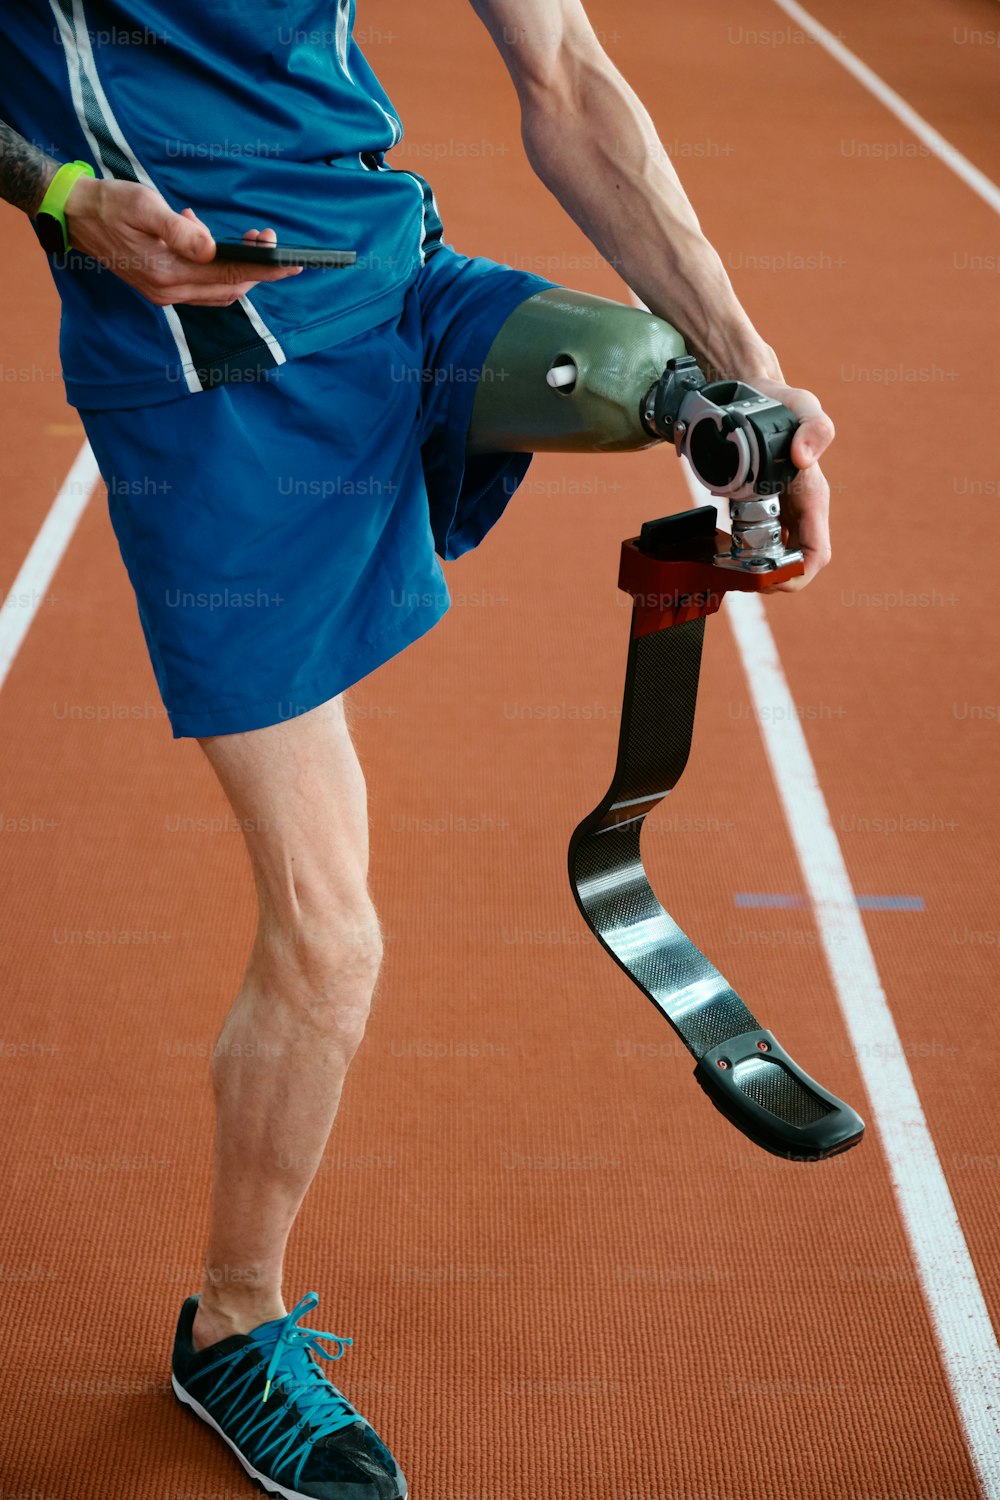 a man standing on a tennis court holding a camera